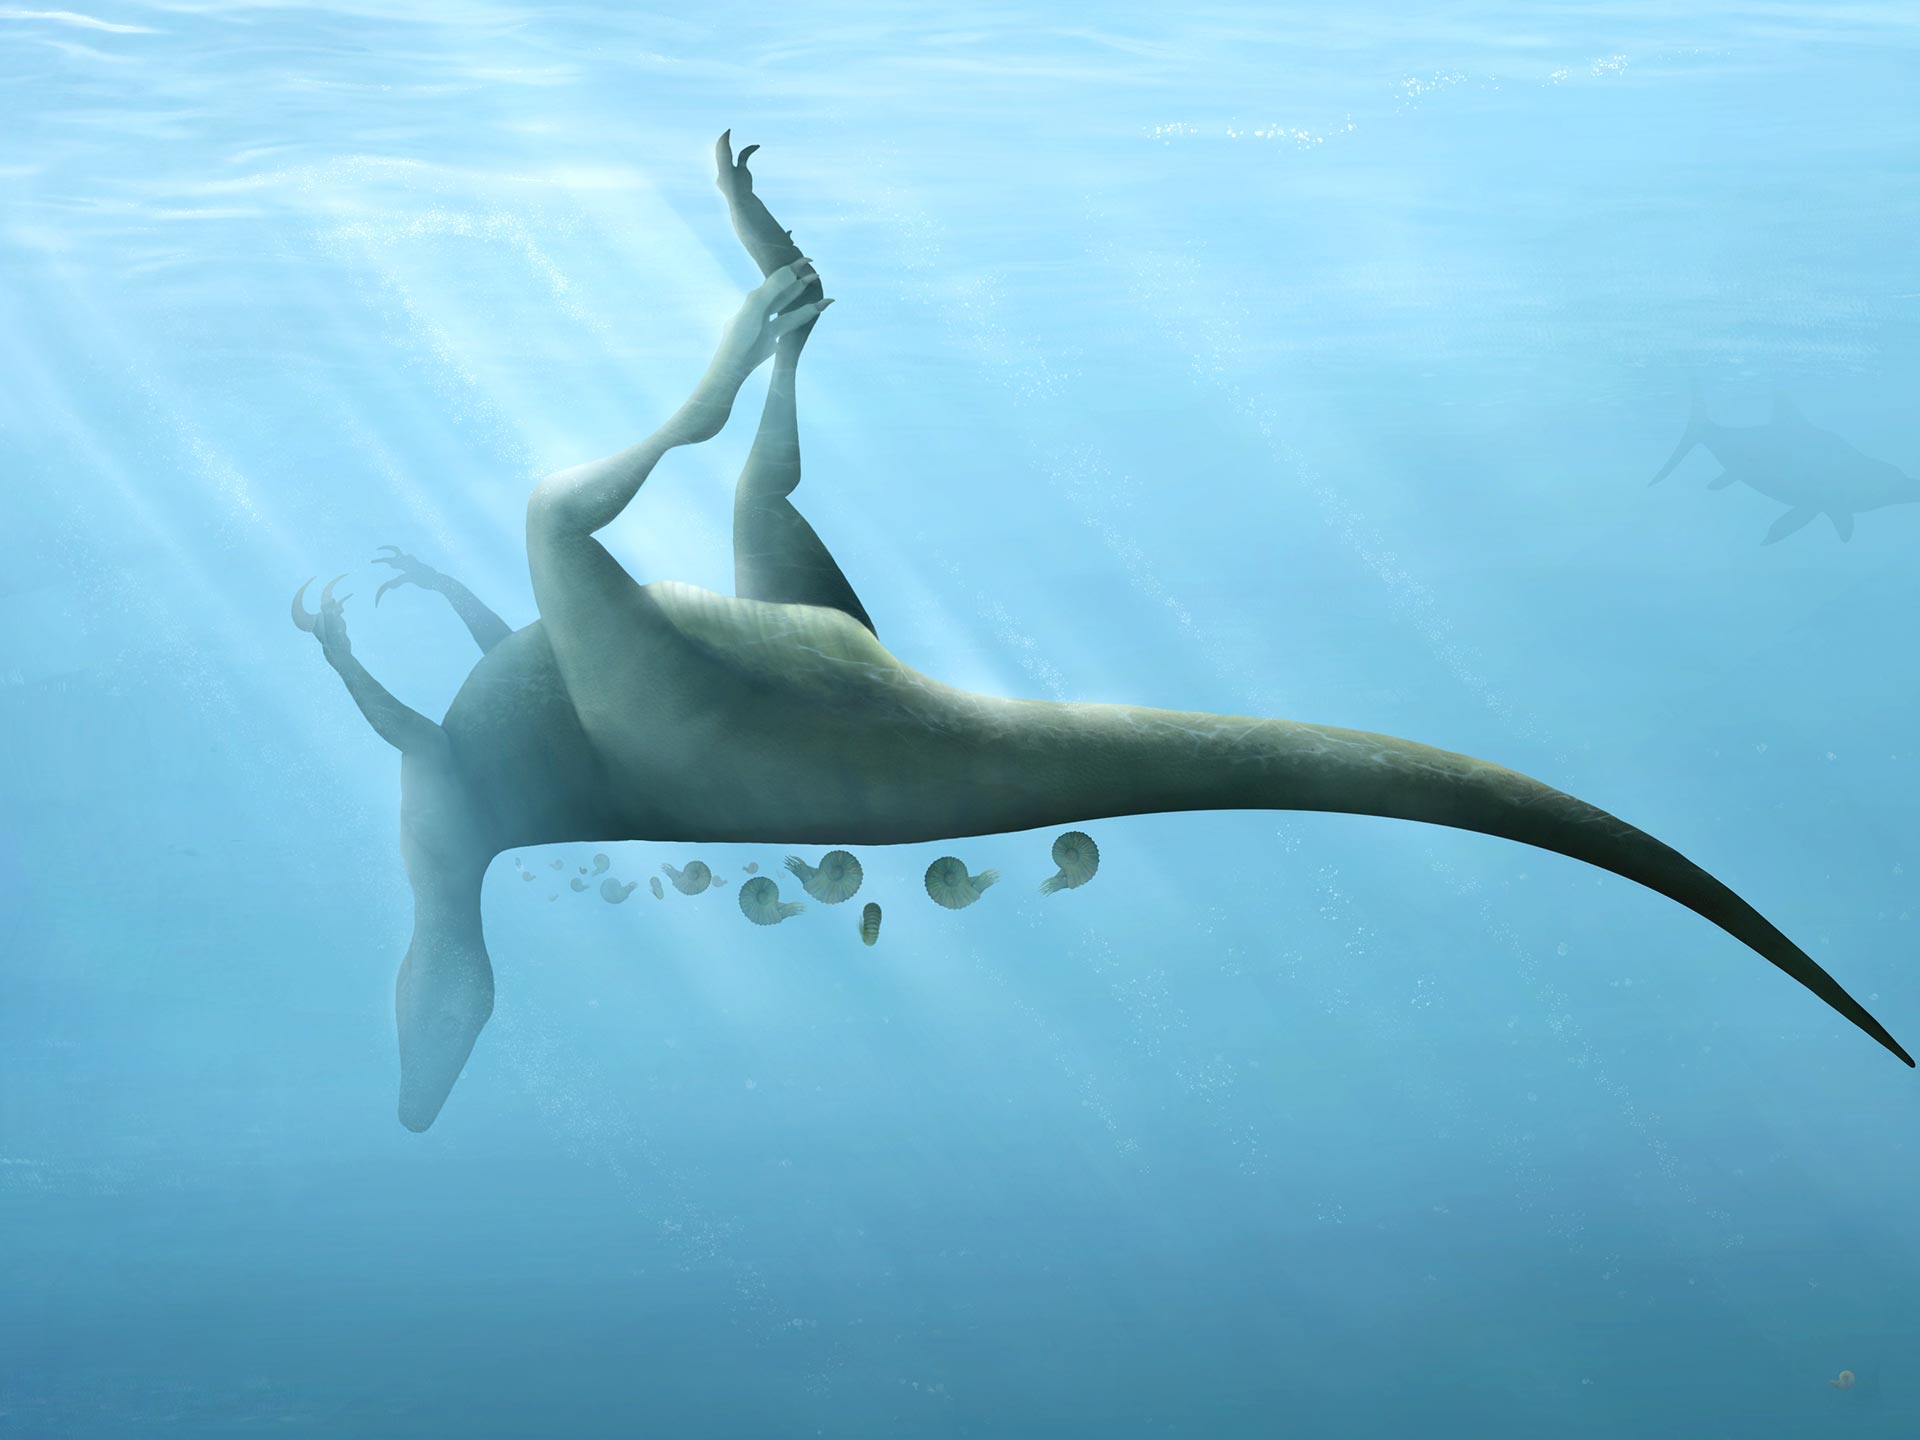 Unusual New Species of Dinosaur Discovered â€“ â€œWe Were Struck by Just How Hollow This Animal Wasâ€ - SciTechDaily